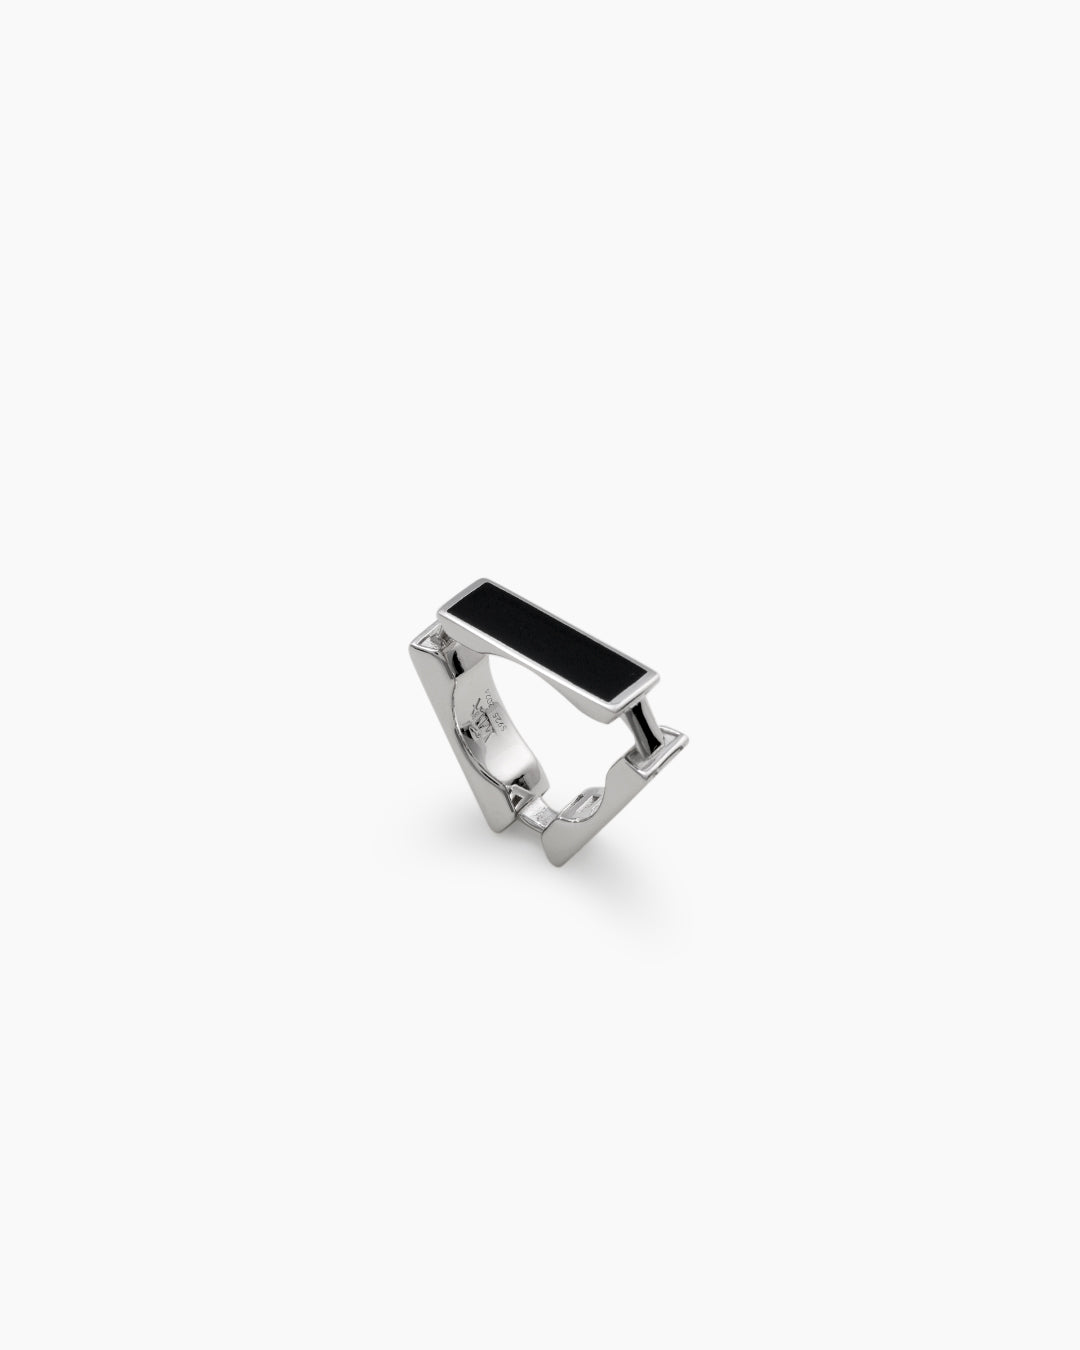 Montage Ring_Large_Silver-Plated, Black